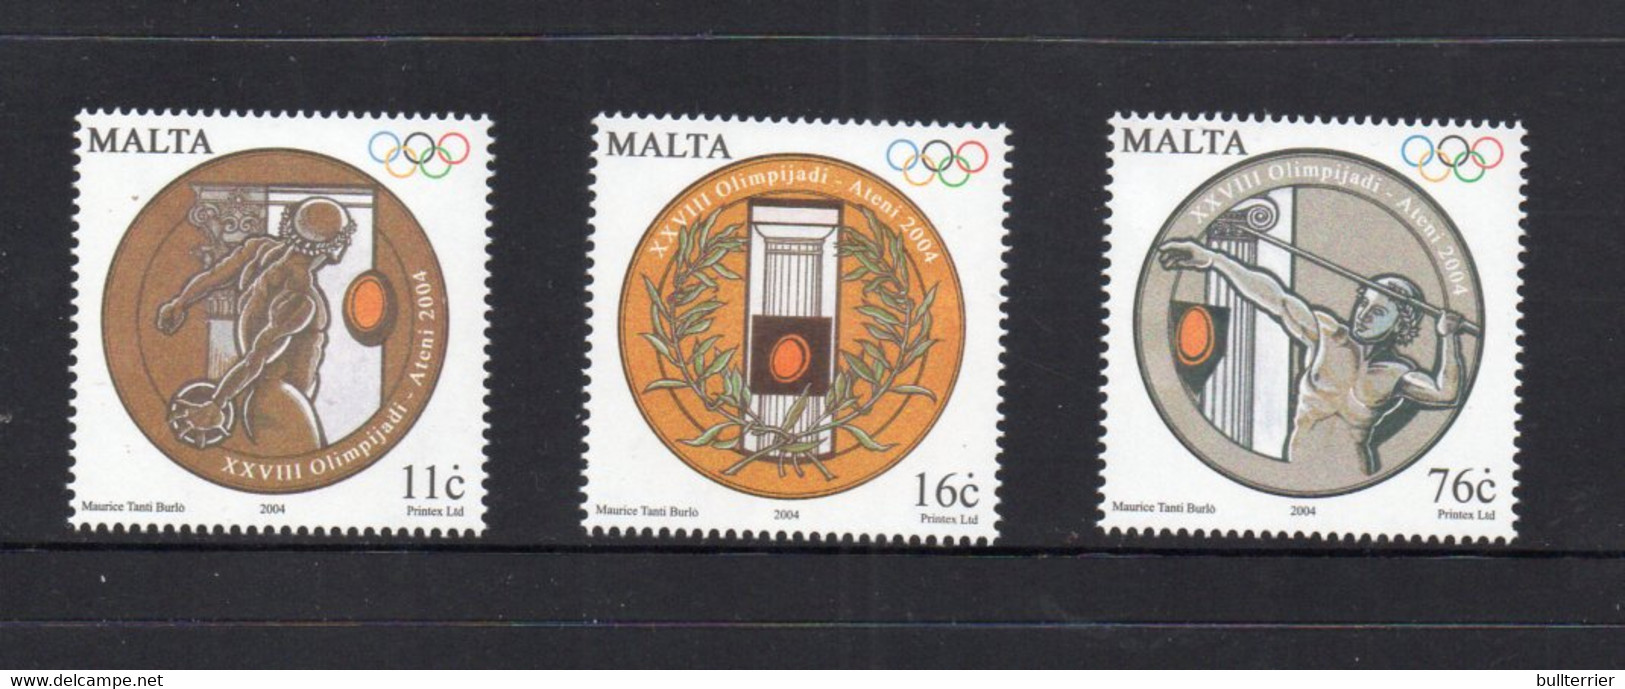 OLYMPICS  - MALTA - 2004 - ATHENS OLYMPICS SET OF 3  MINT NEVER HINGED - Sommer 2004: Athen - Paralympics